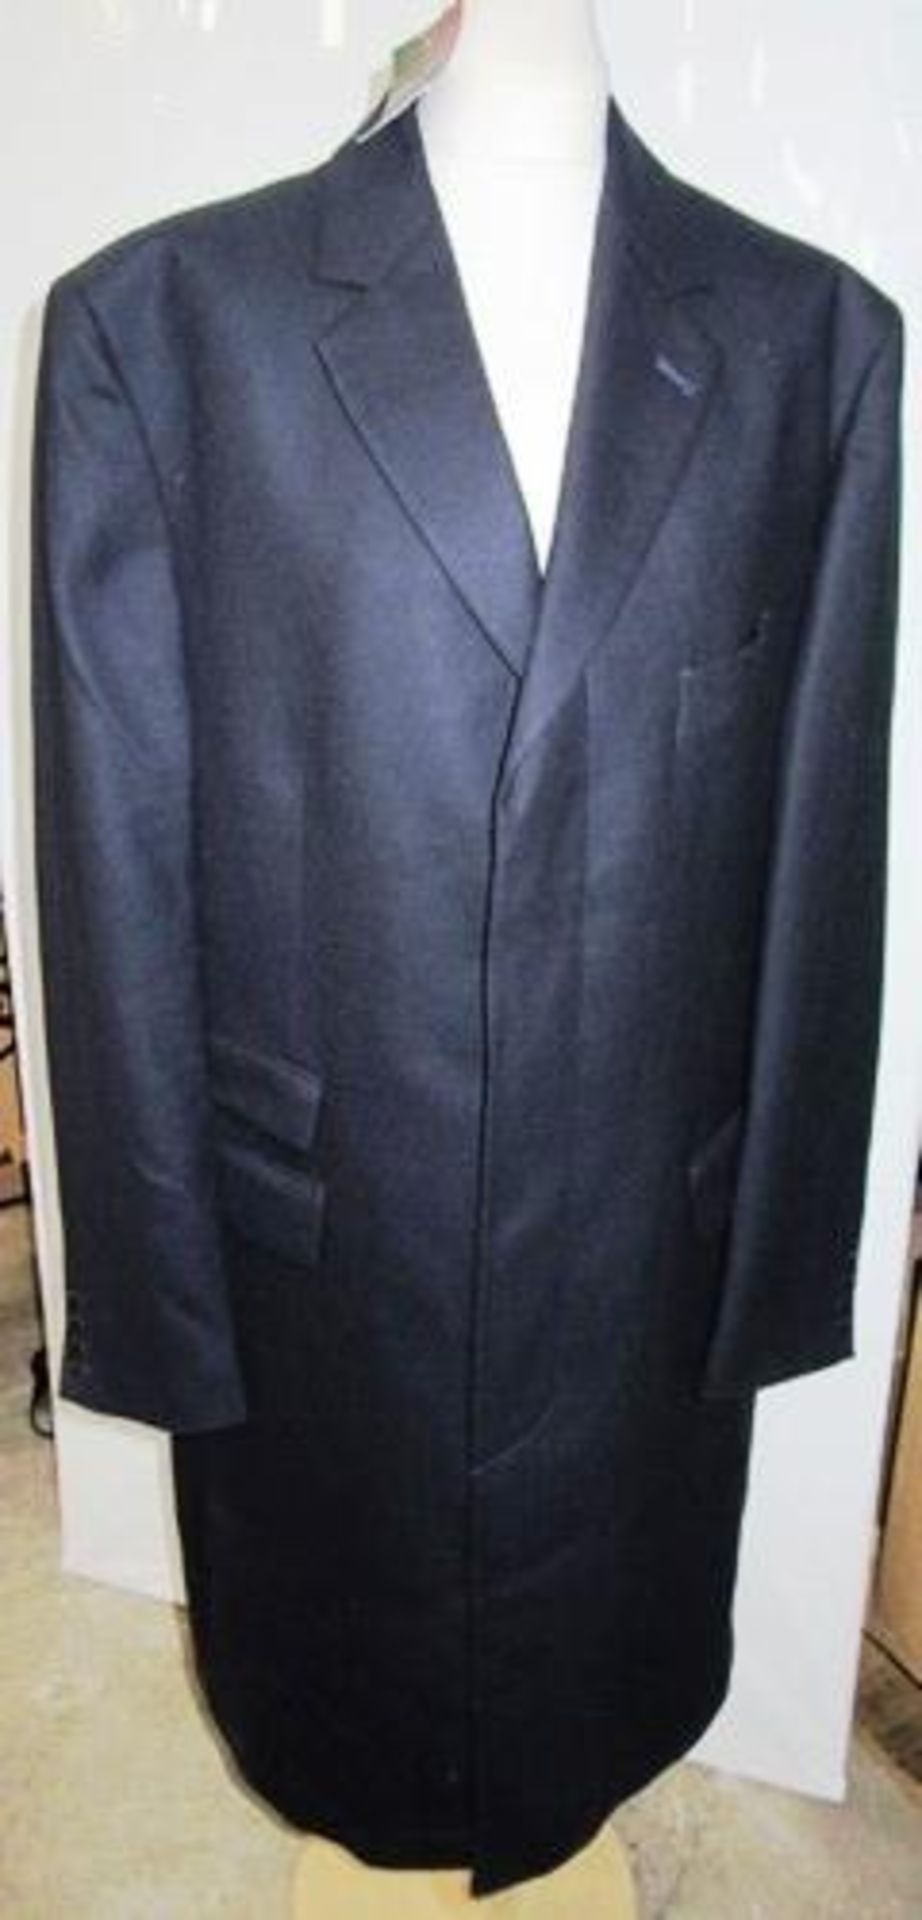 1 x Roderick Charles men's pure wool navy overcoat, size 46L - new (crail)